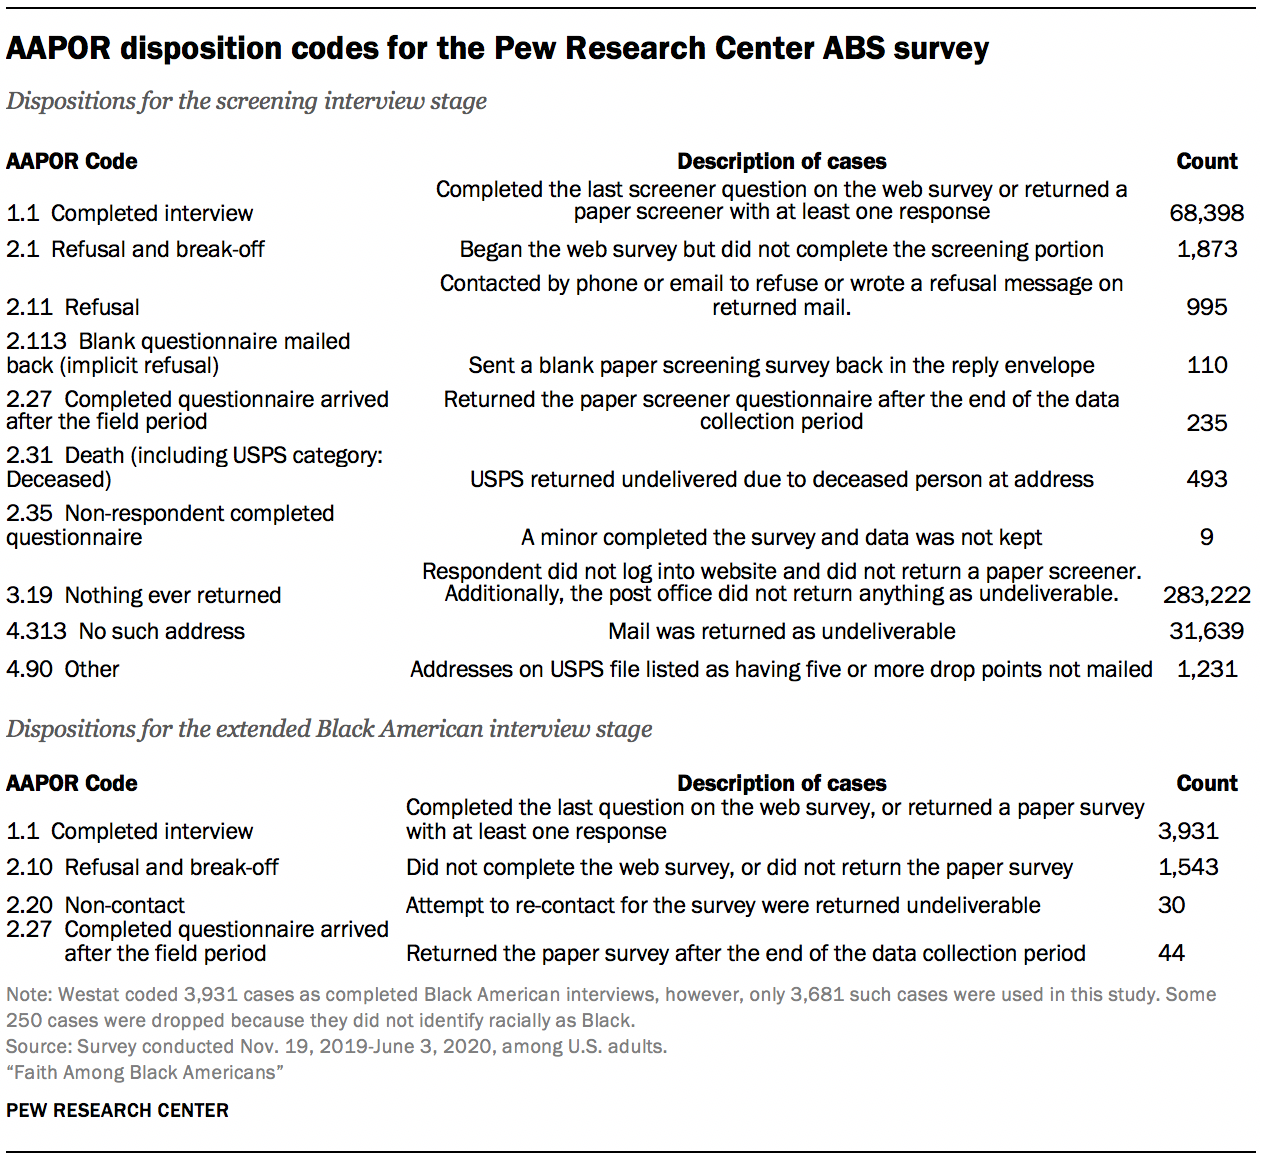 AAPOR disposition codes for the Pew Research Center ABS survey